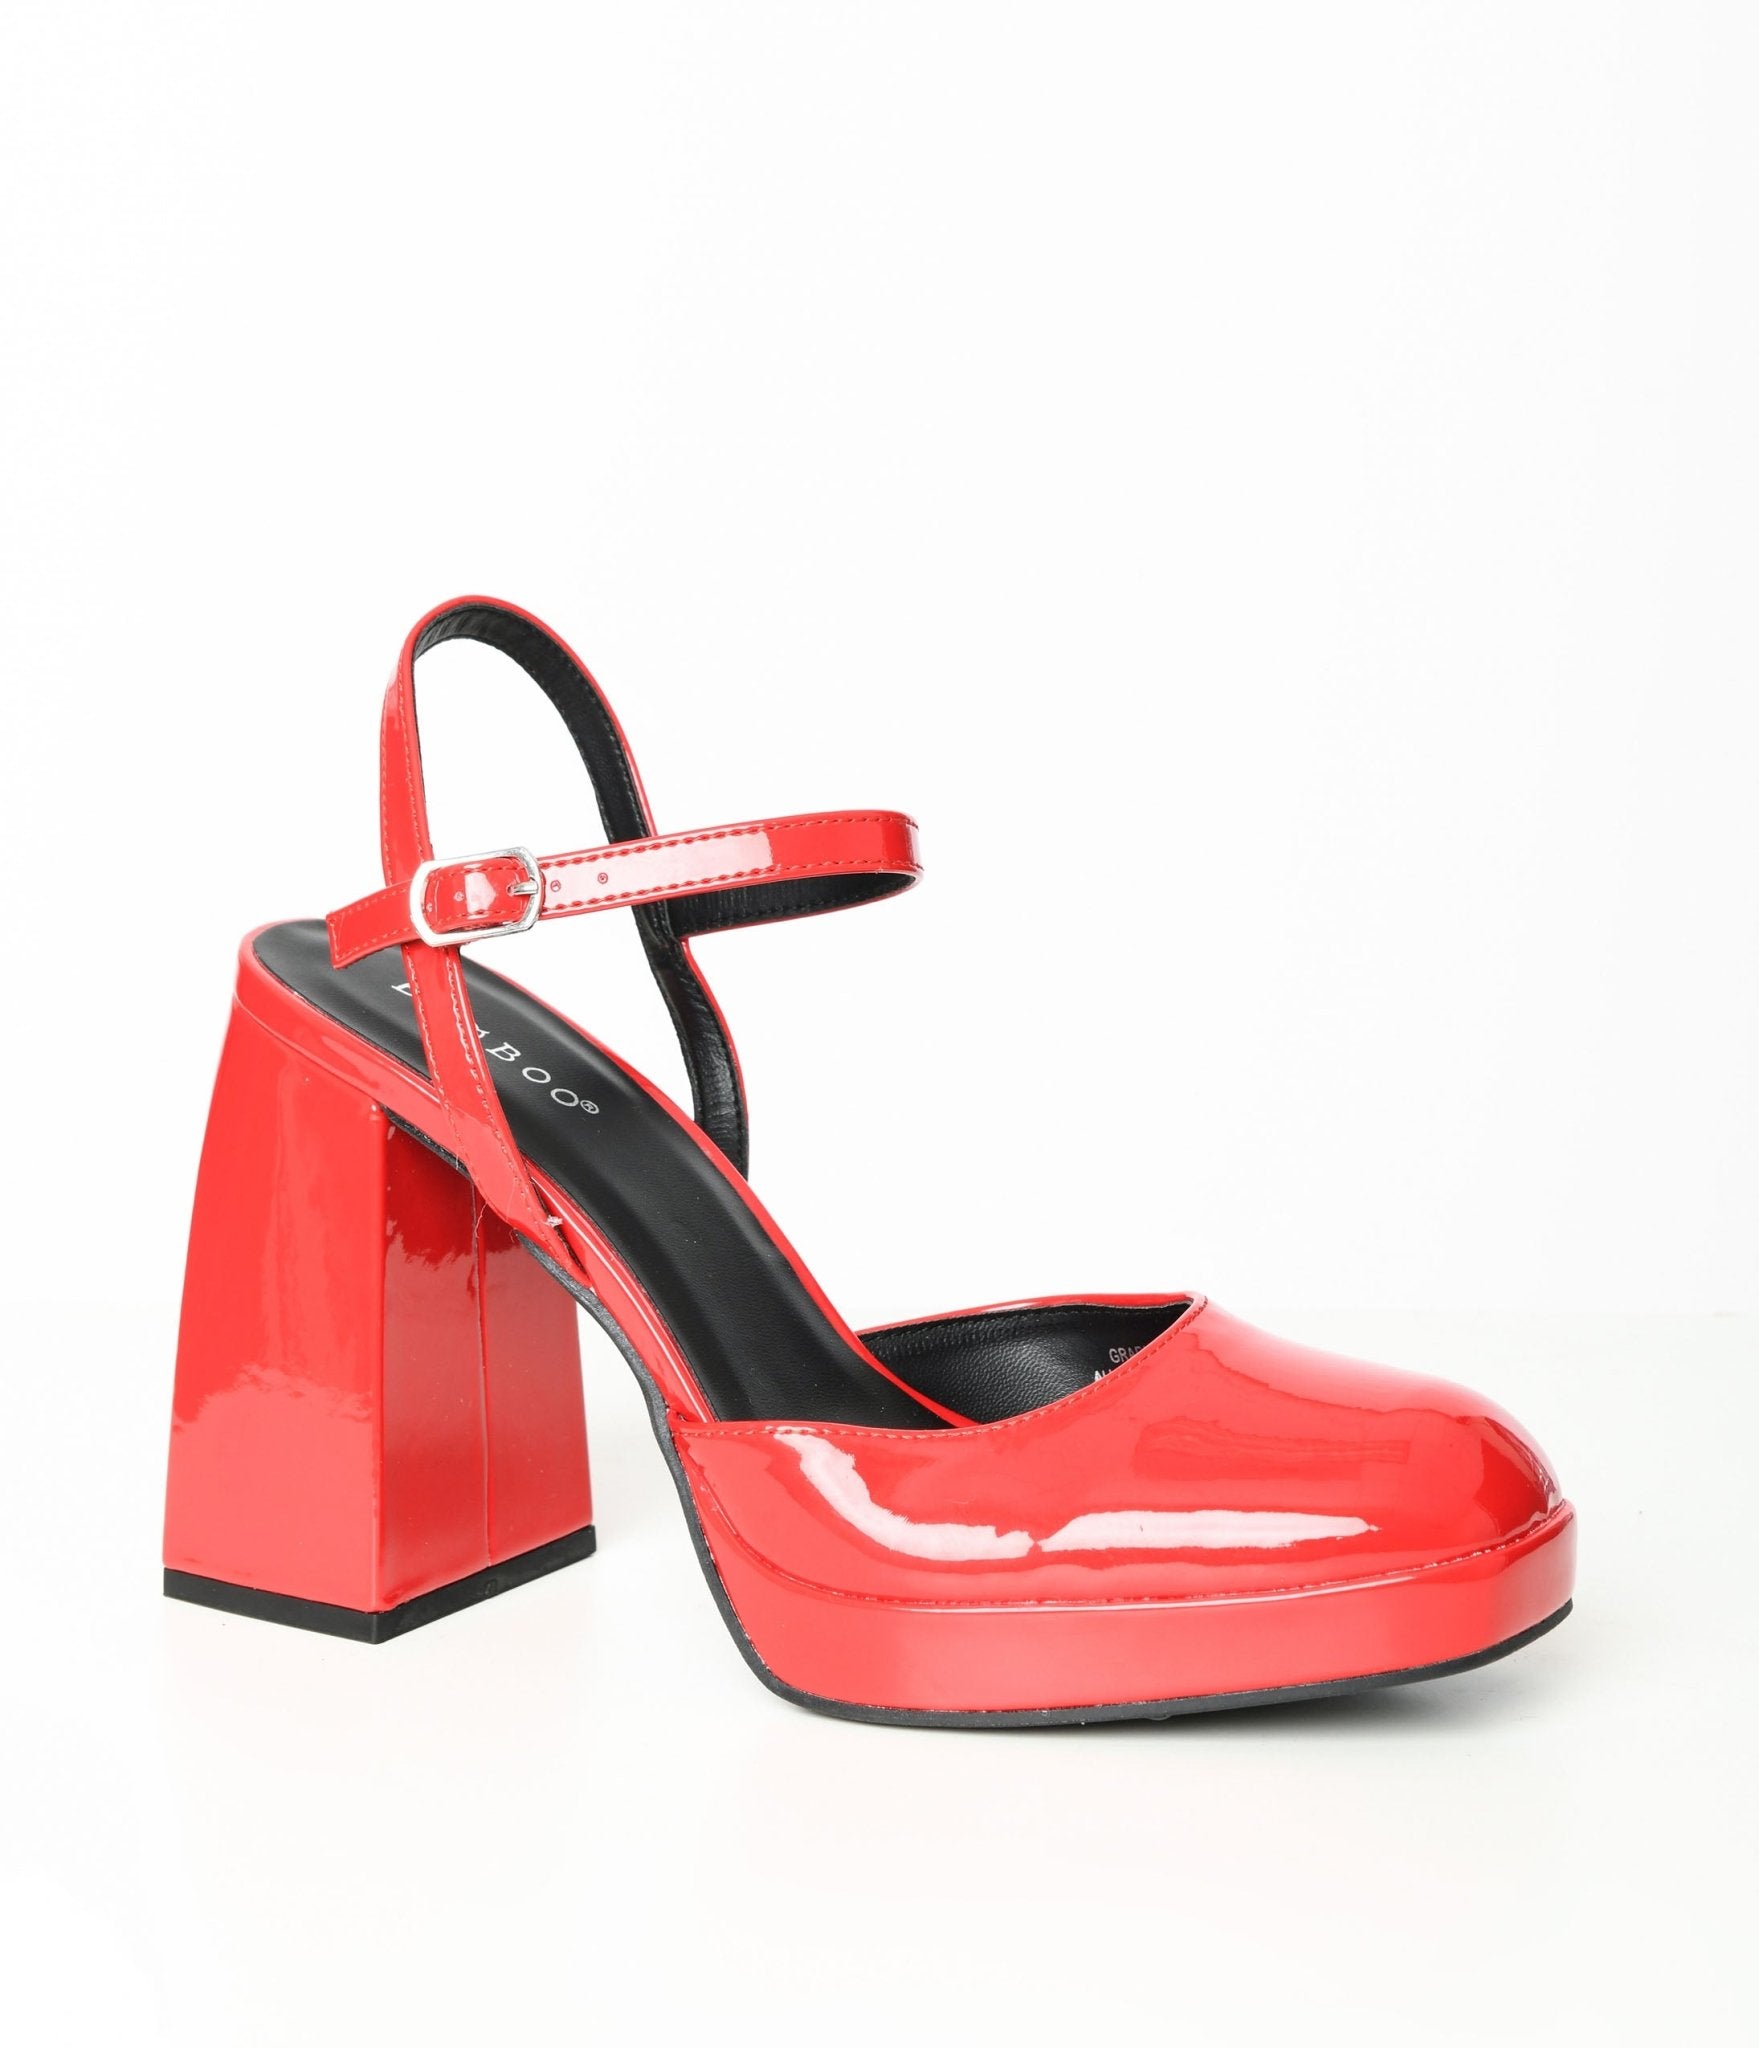 80's Mademoiselle Shoes: 80s -Mademoiselle- Womens red with black lace over  classic totally 80s pumps with solid red 3 inch stiletto heels and pointed  toe. All you need now is some spandex